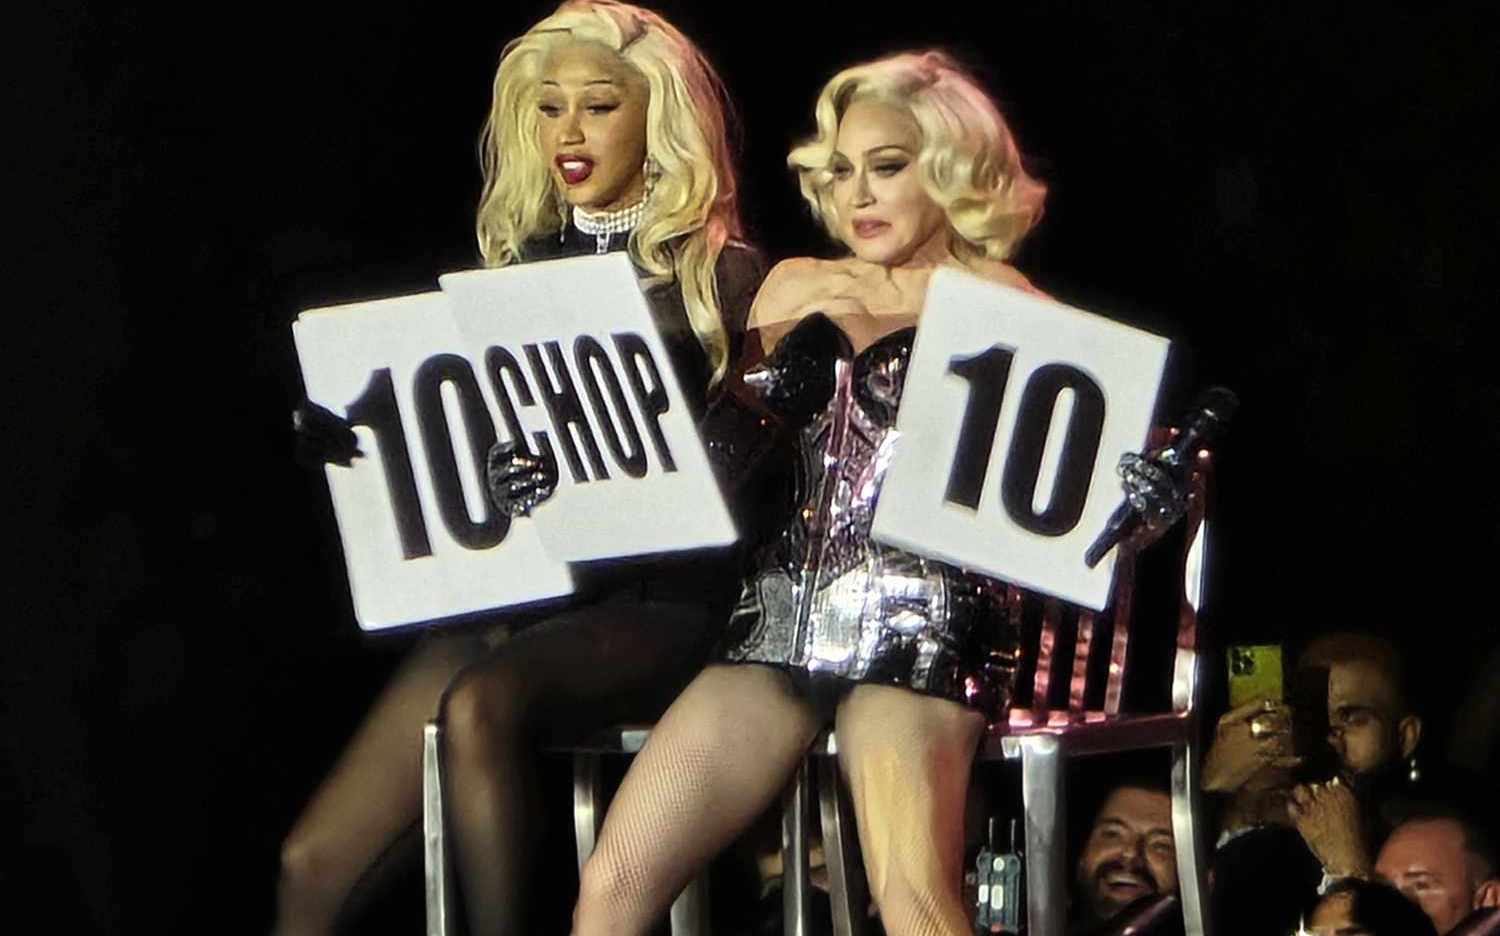 Madonna Brings Out Cardi B During Her Tour to Judge Vogue Session